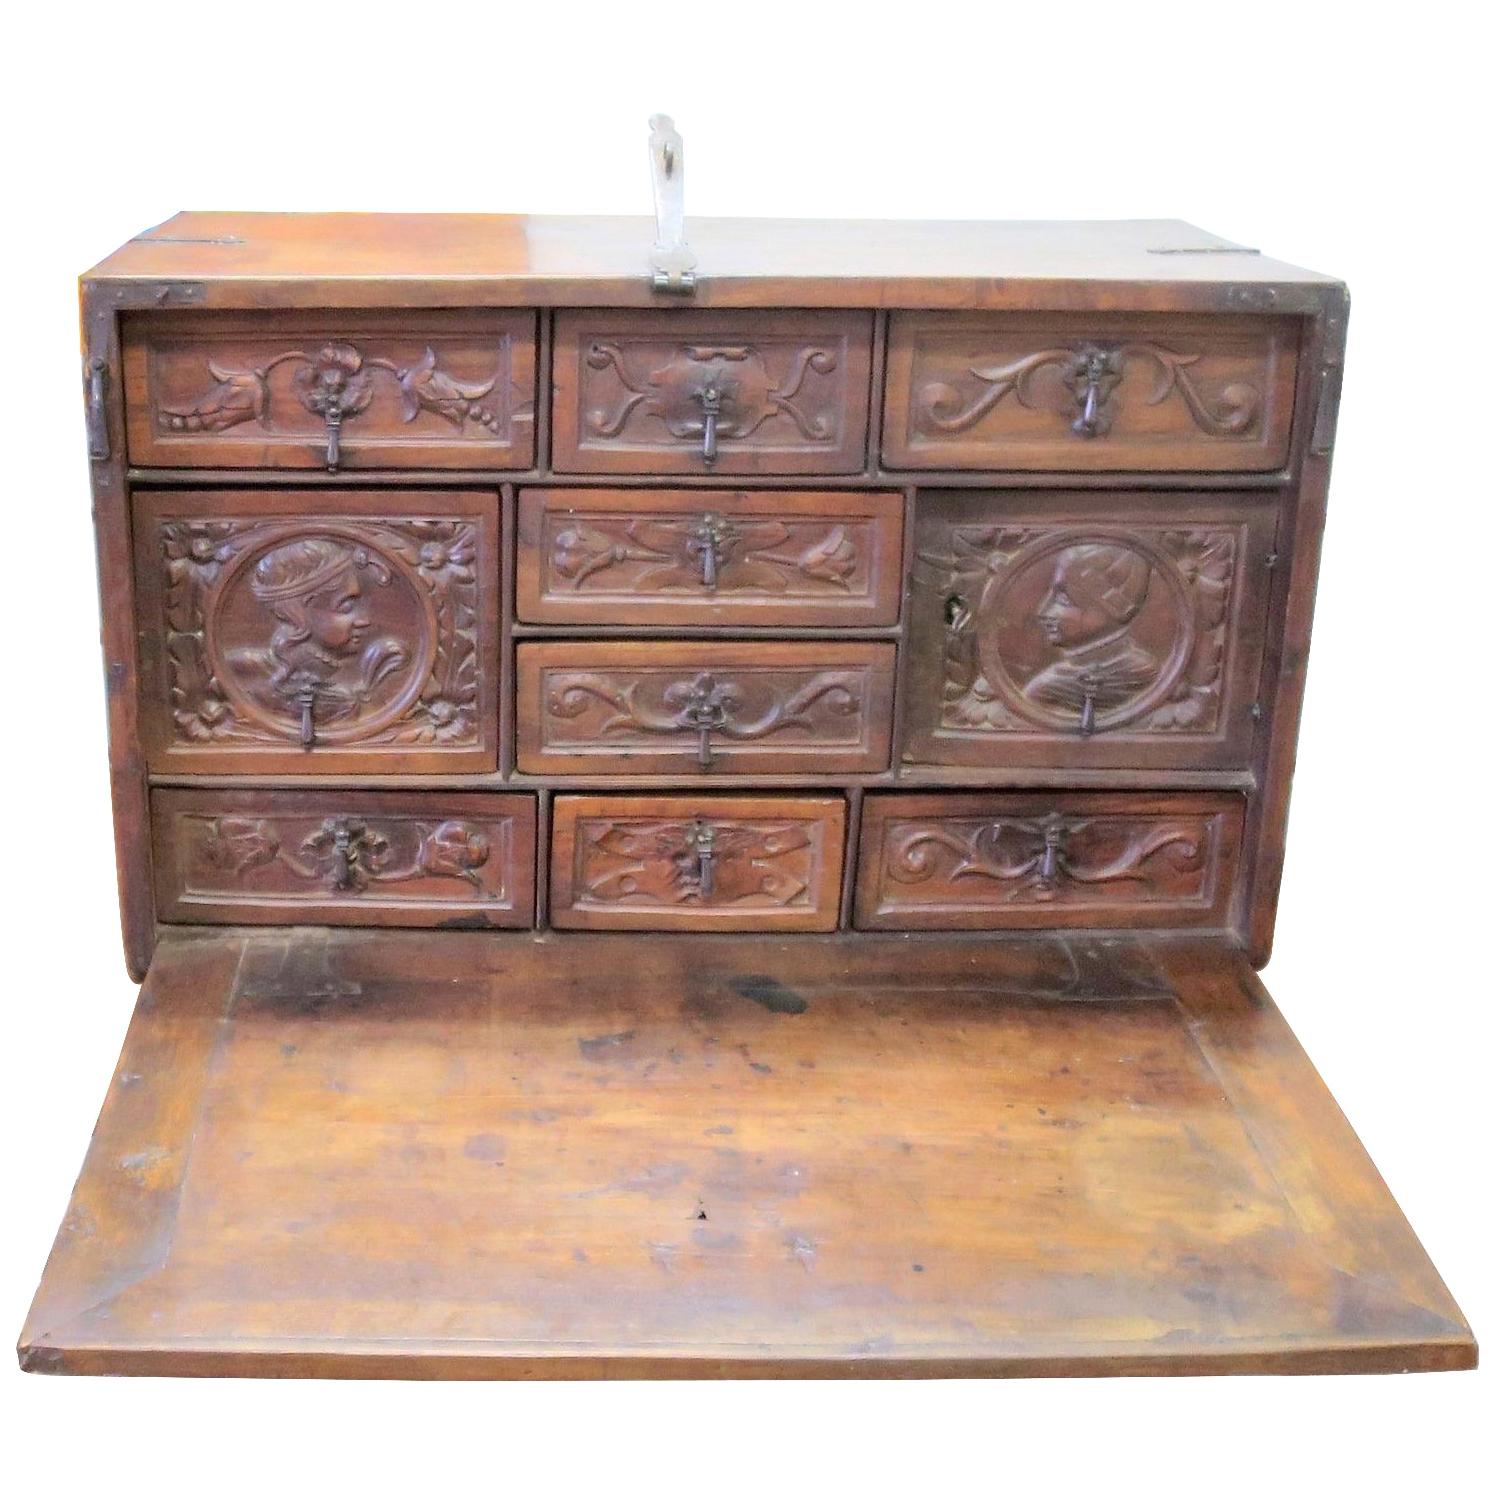 Bargueño End of 16th Century Portugal "Writting Desk" with Drawers, Bargueno